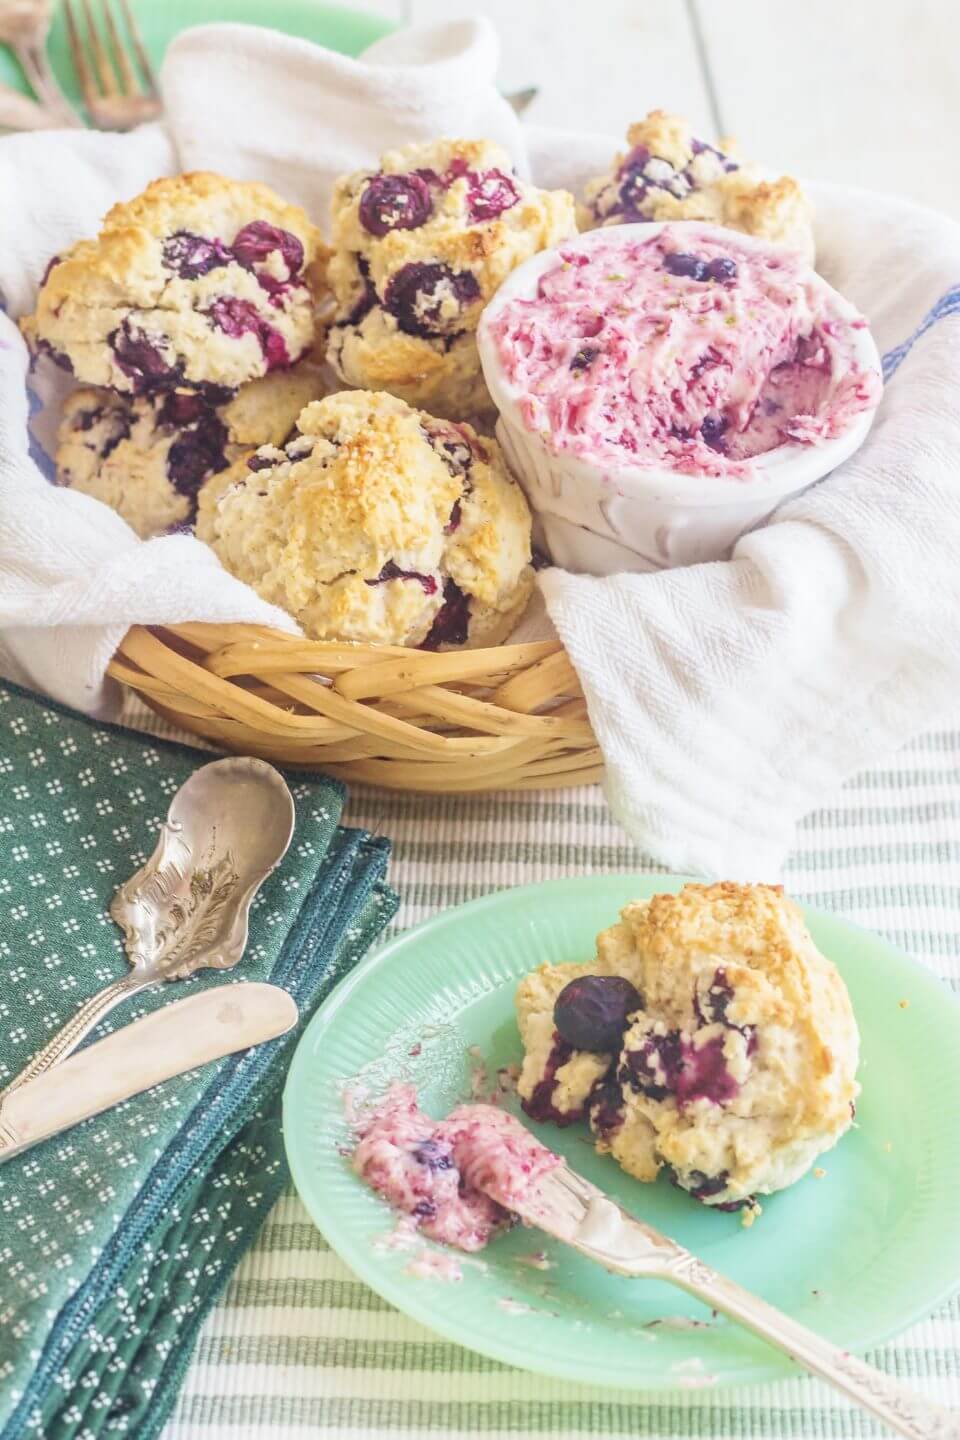 Blueberry Brunch Recipes Syrup & Biscuits Wish Farms